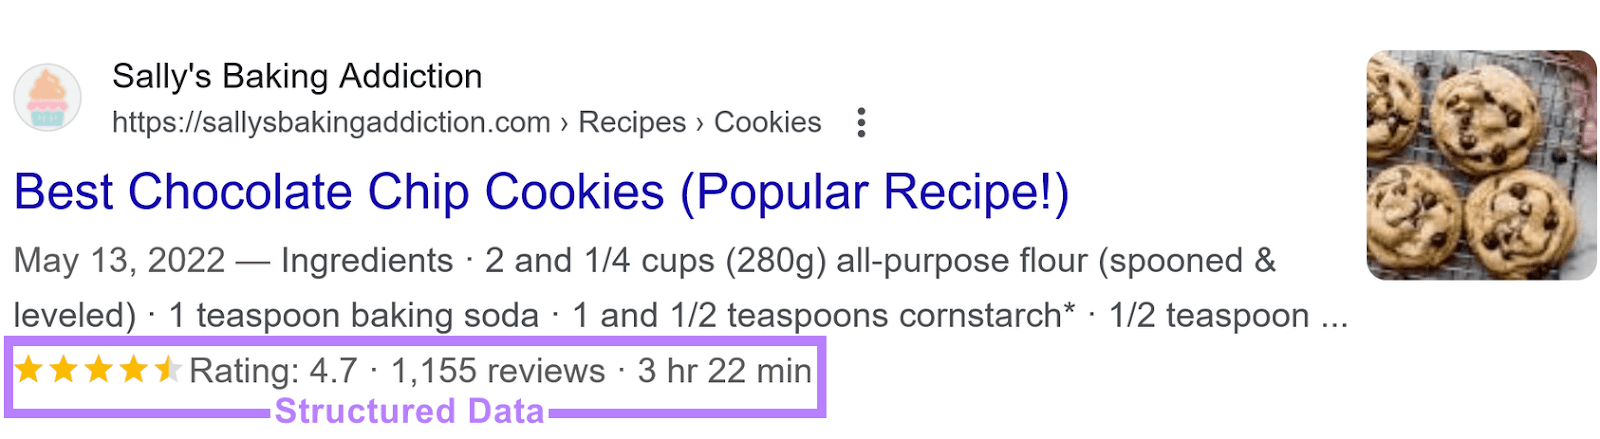 Google SERP showing a recipe for "Best Chocolate Chip Cookies" with structured data highlighted in purple.